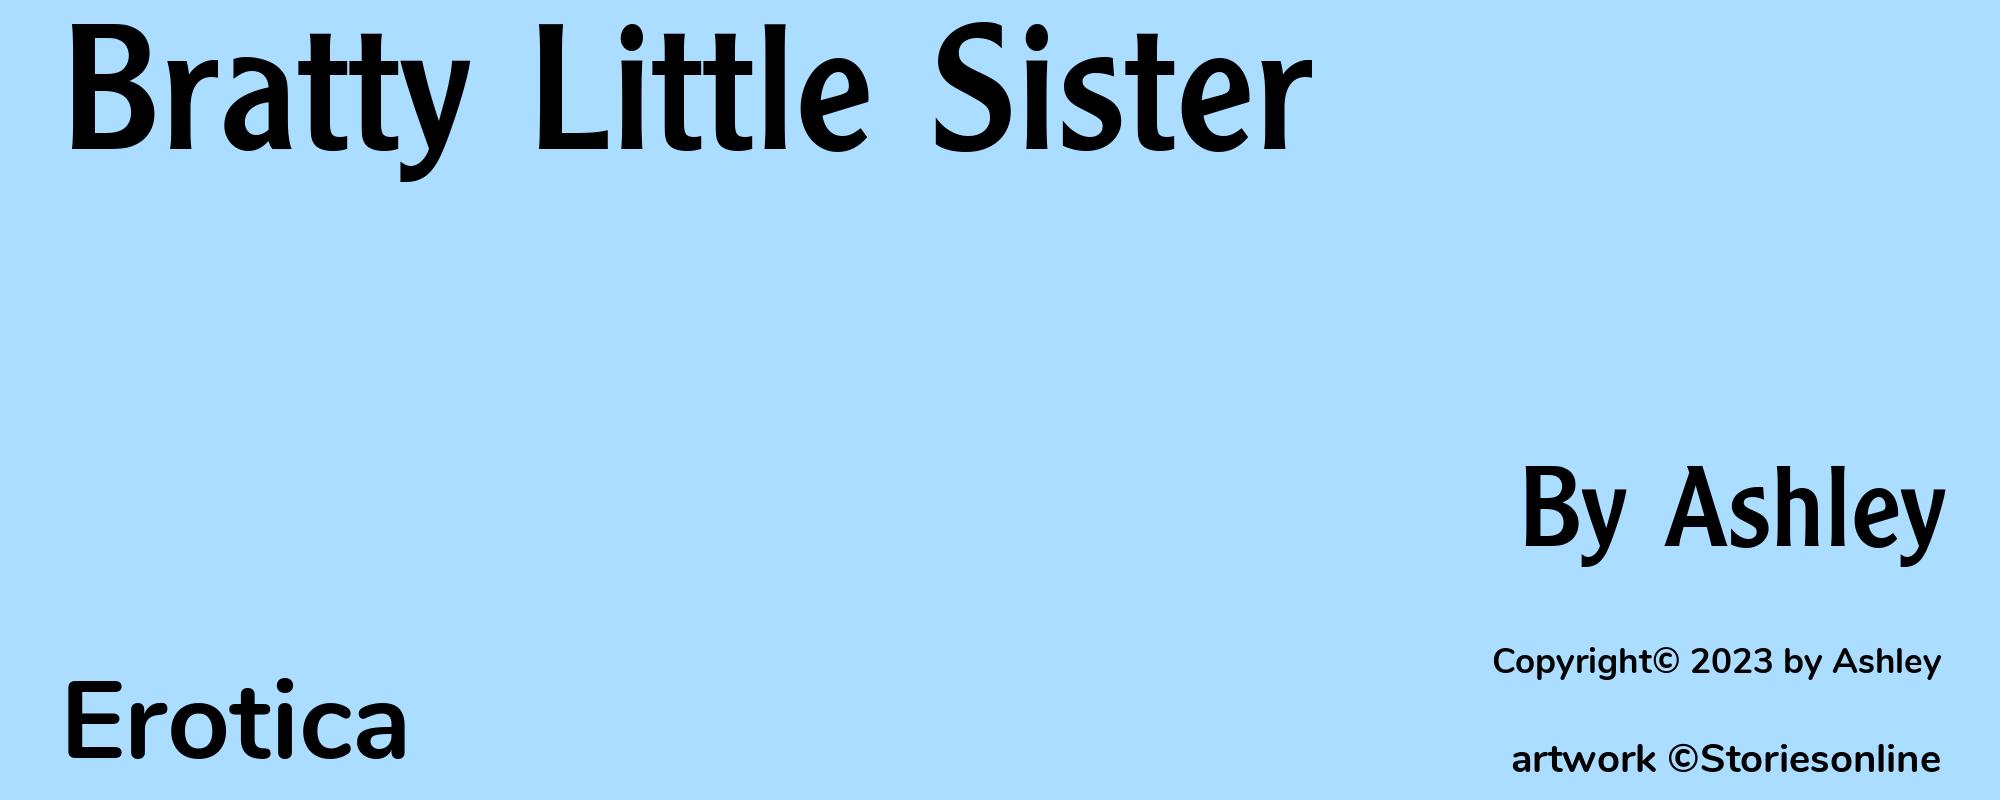 Bratty Little Sister - Cover